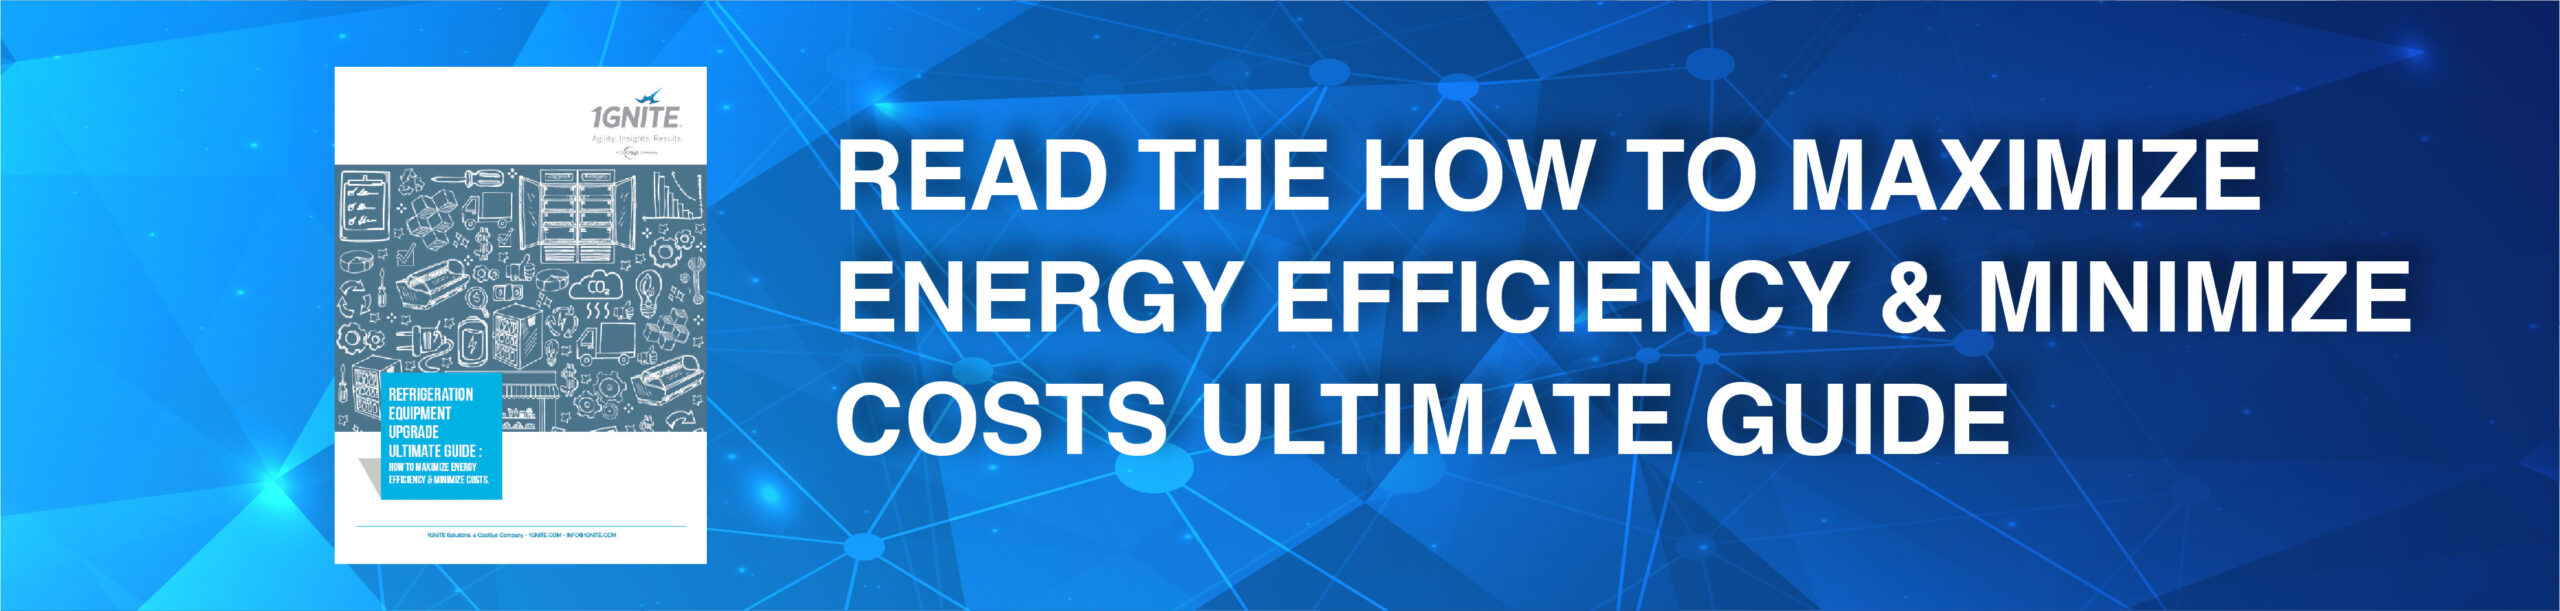 HOW TO MAXIMIZE ENERGY EFFICIENCY  and MINIMIZE COSTS 1GNITE